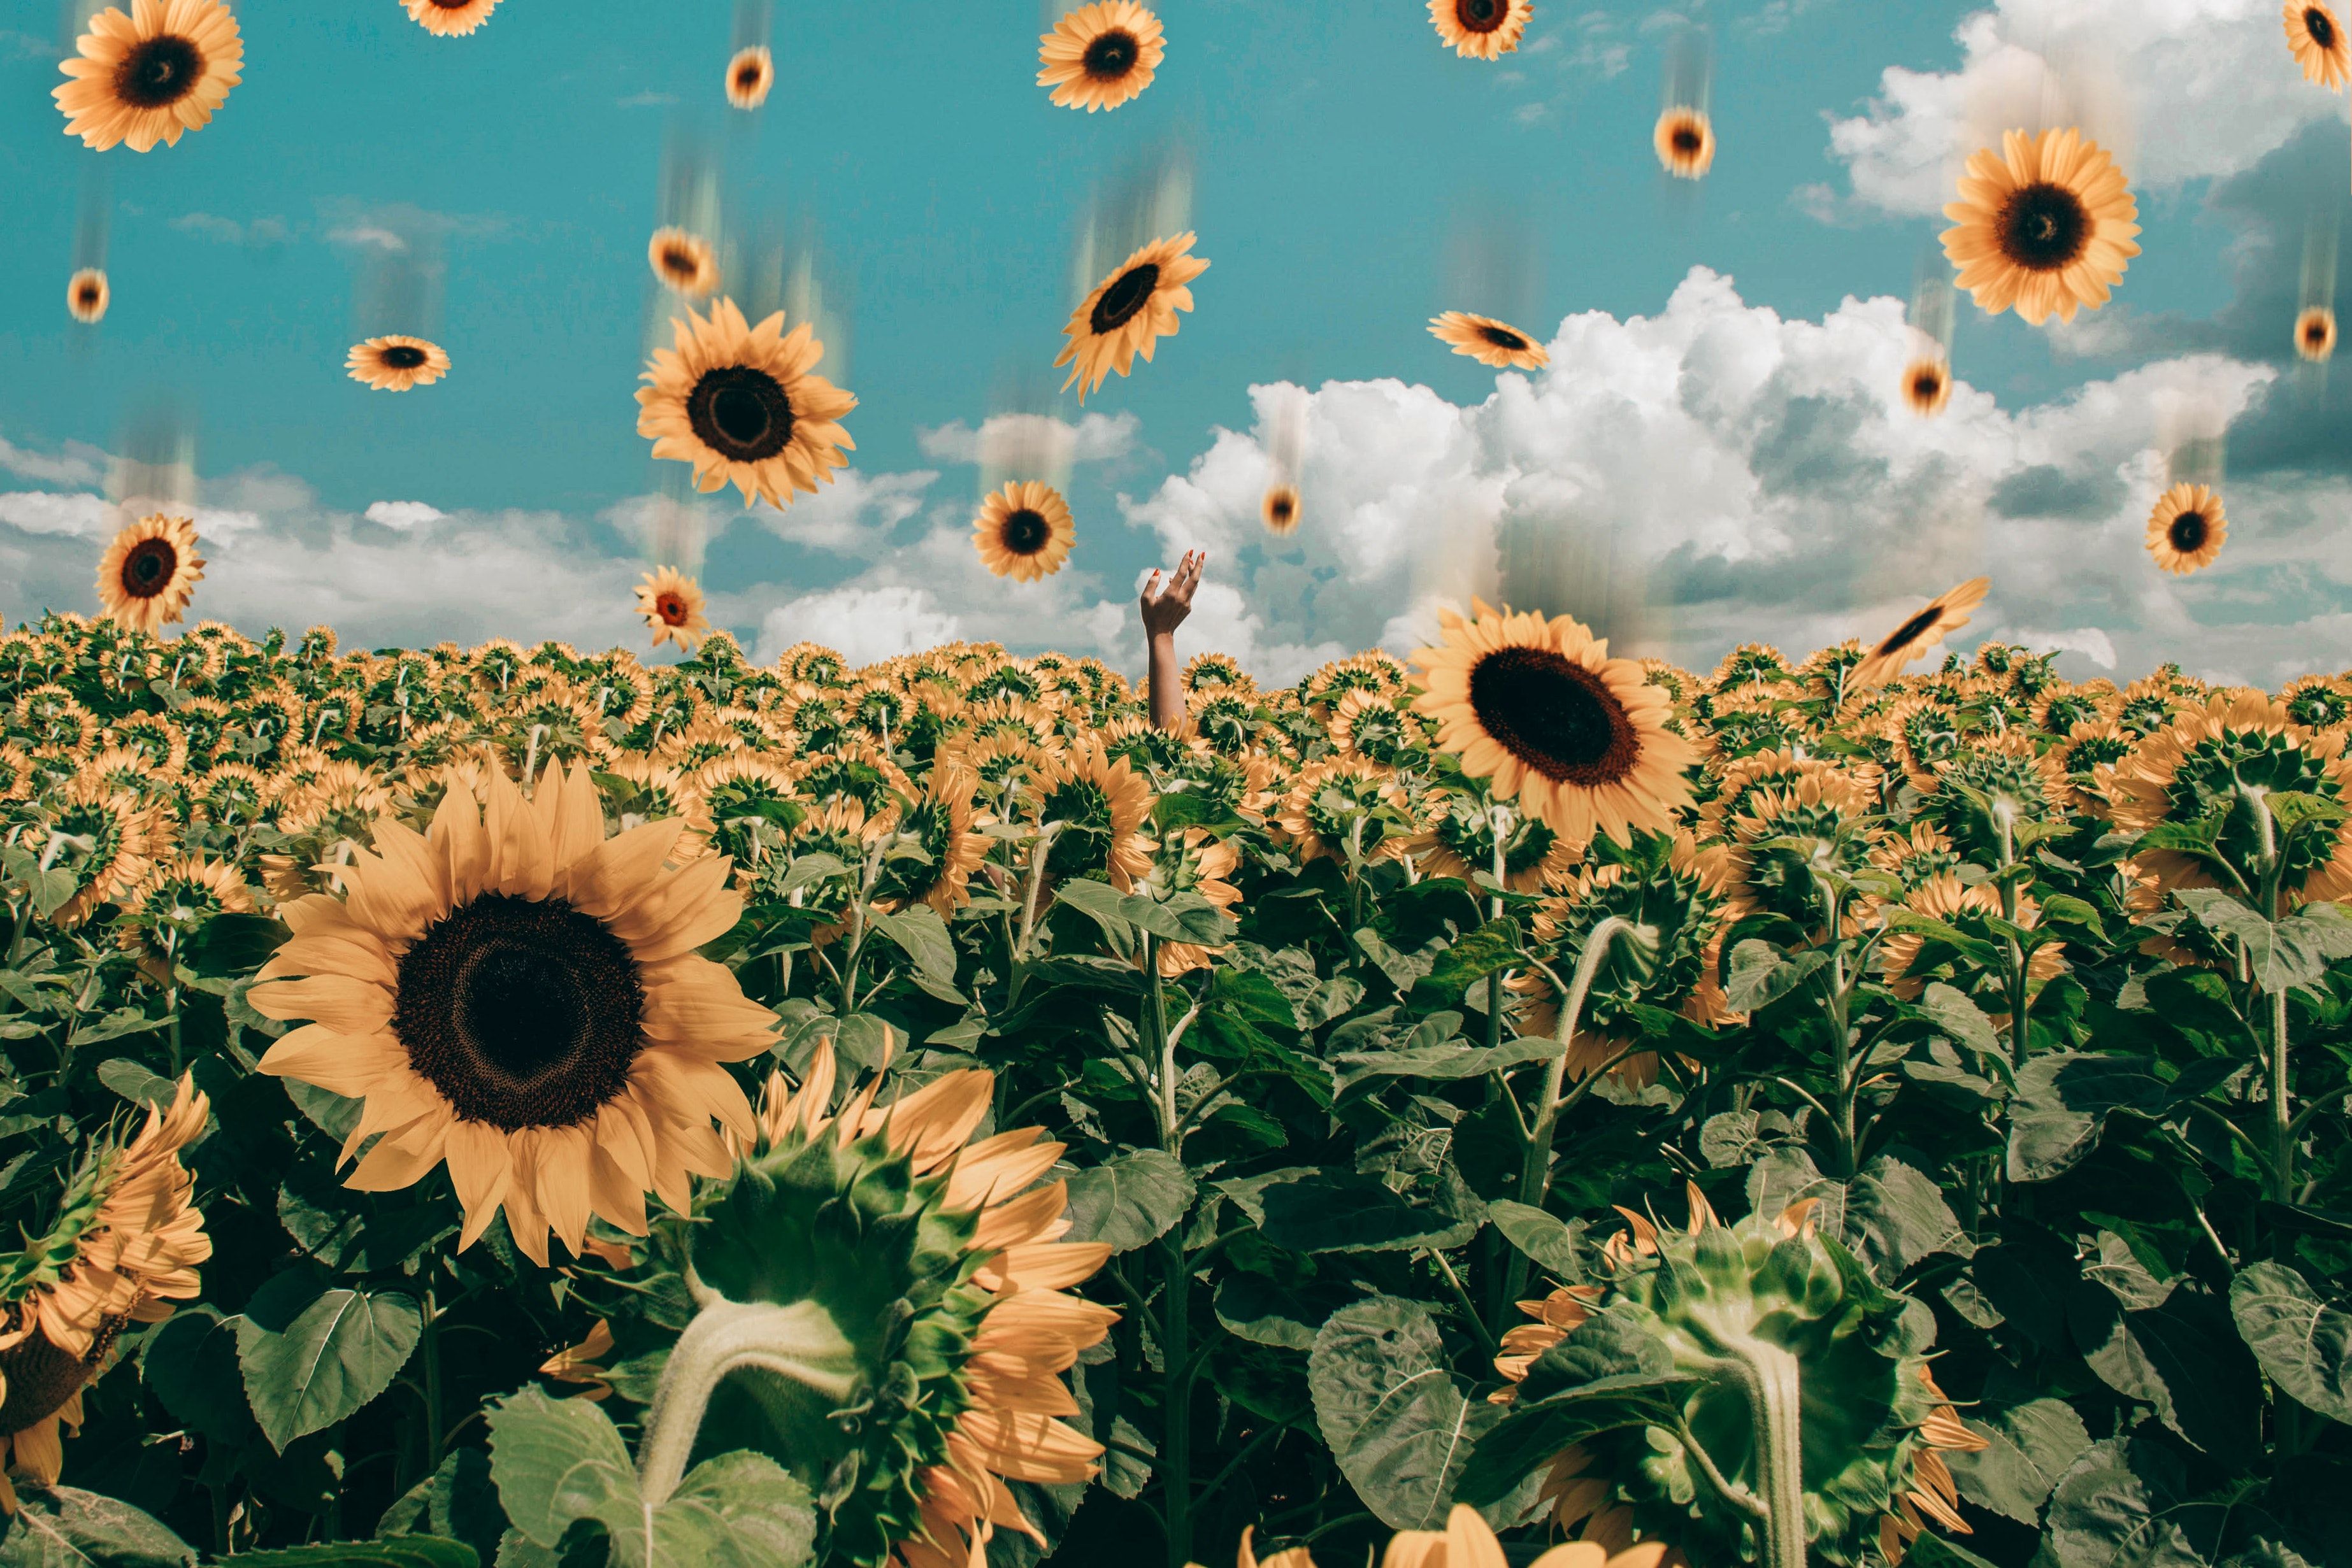 Person in a field of sunflowers throwing sunflowers into the air - Sunflower, computer, farm